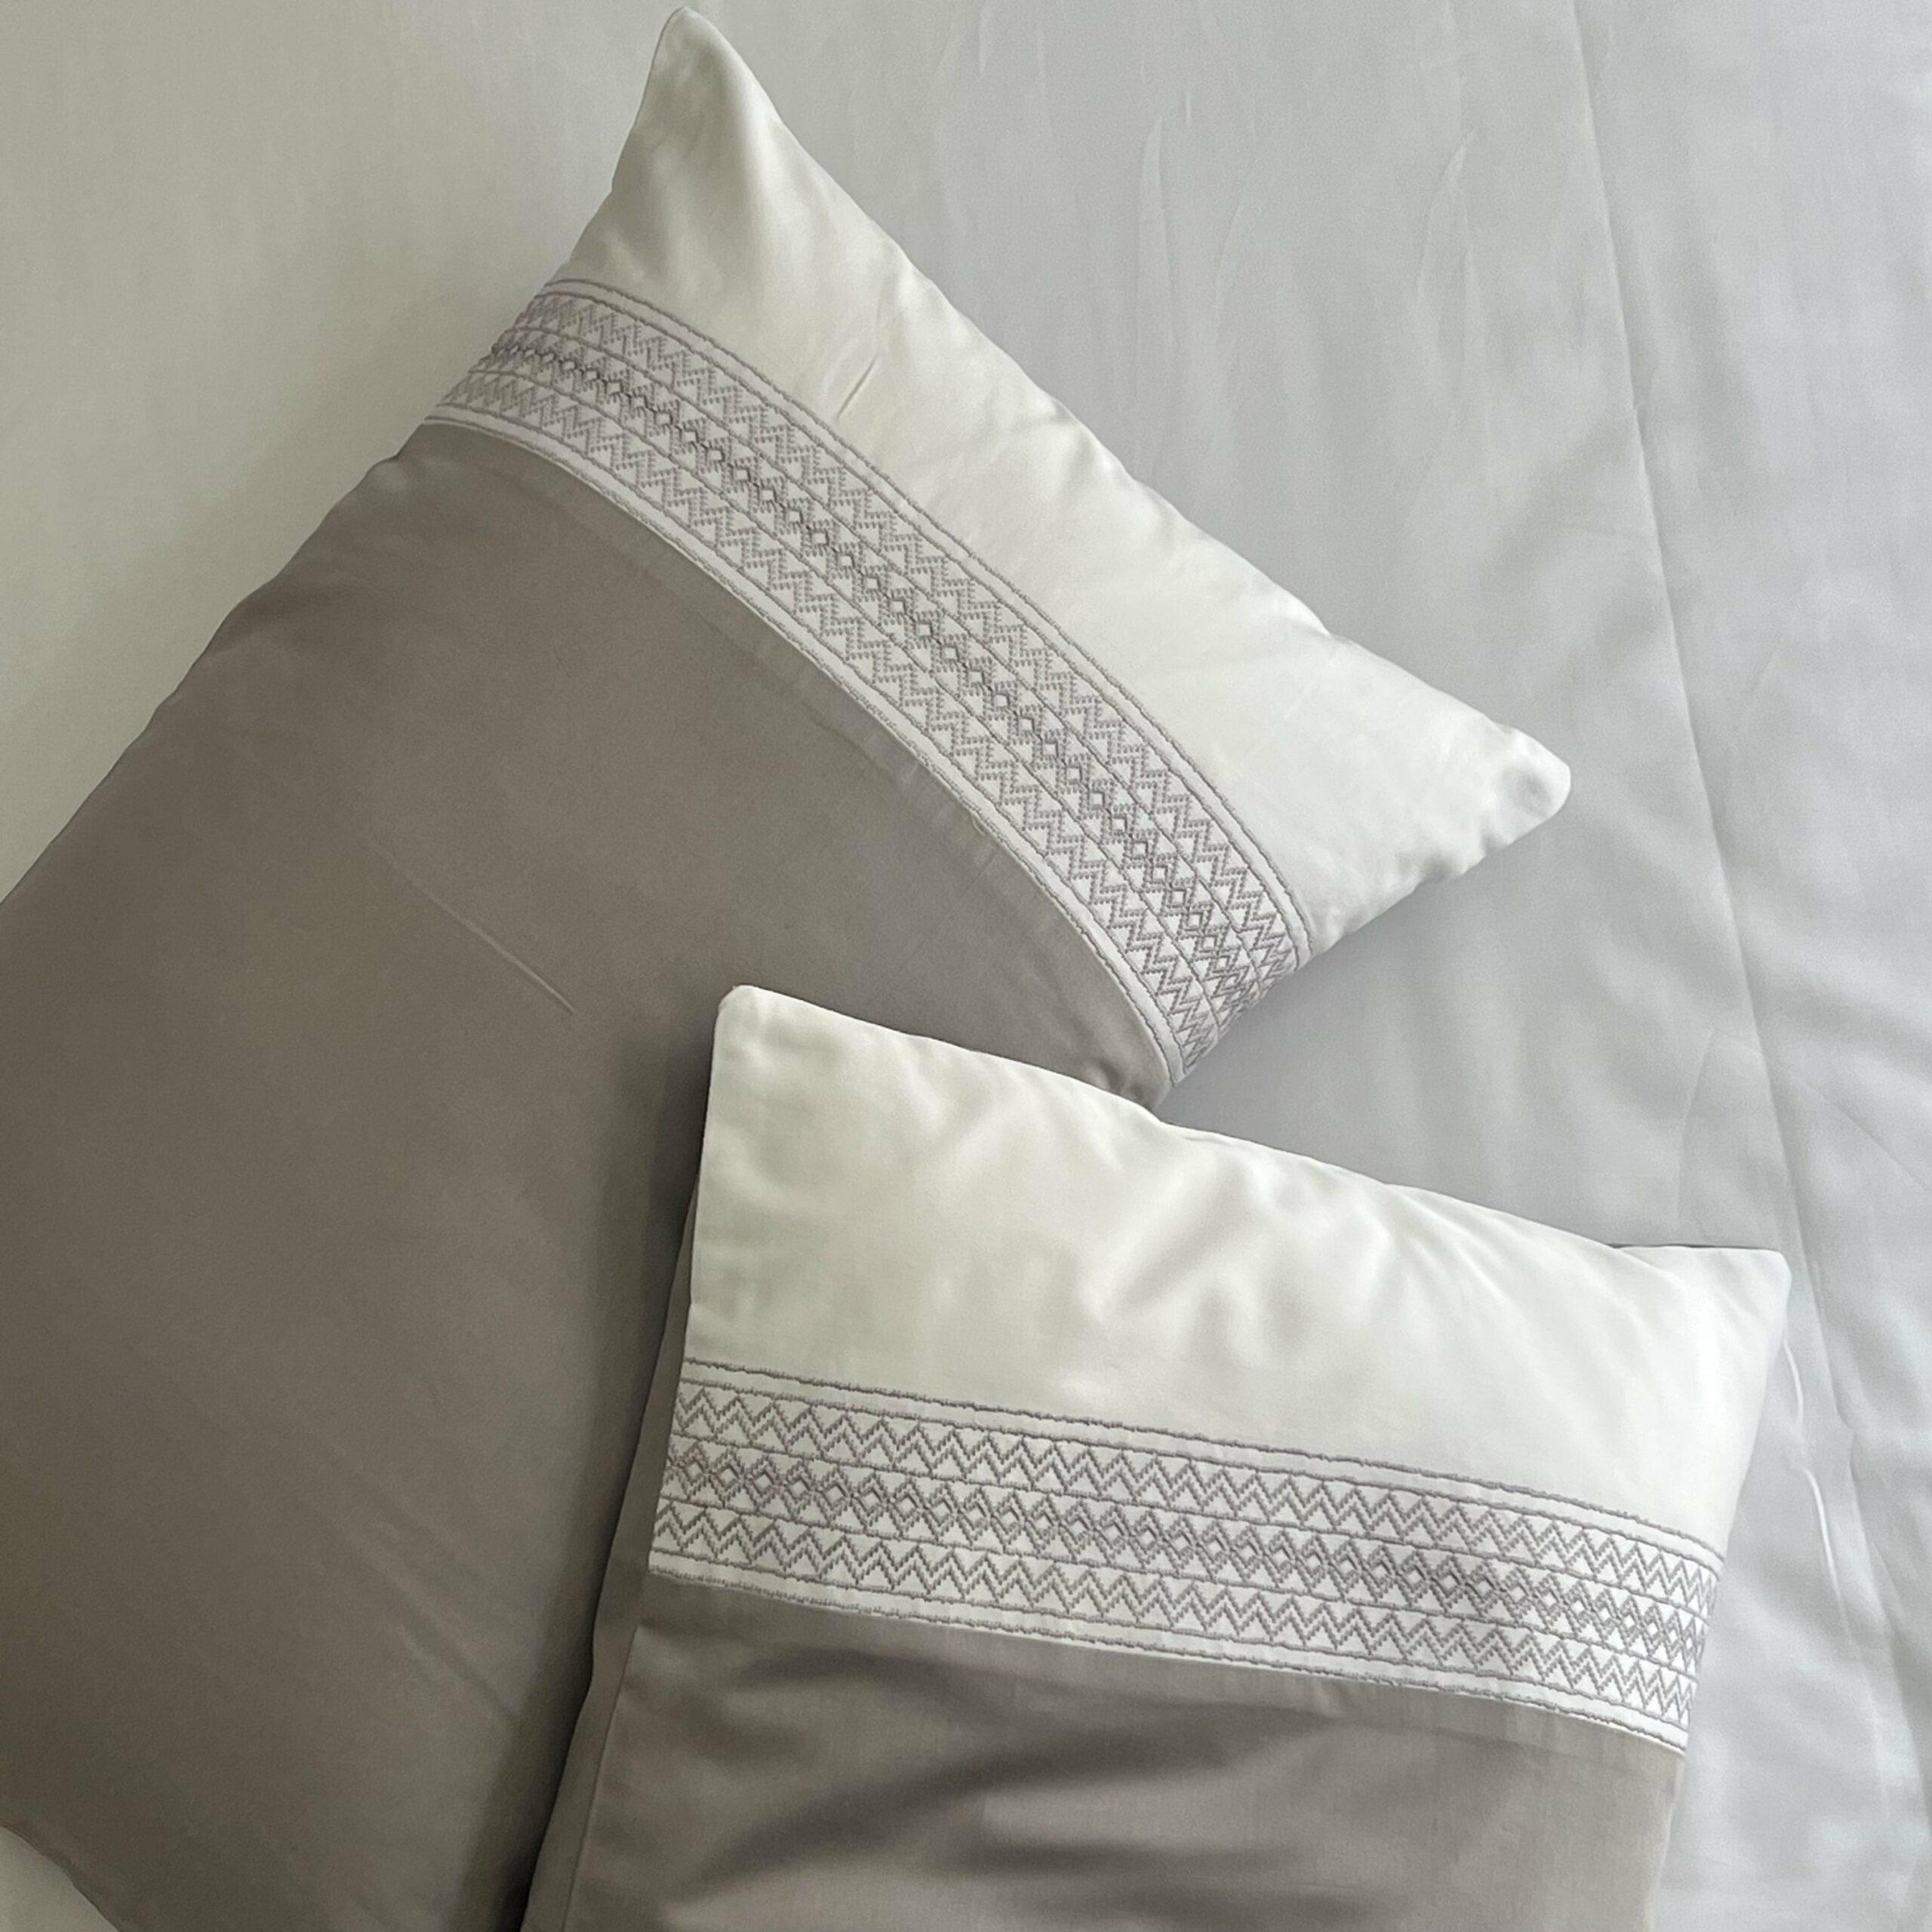 Lucent White Pillow Covers (Set of 2)